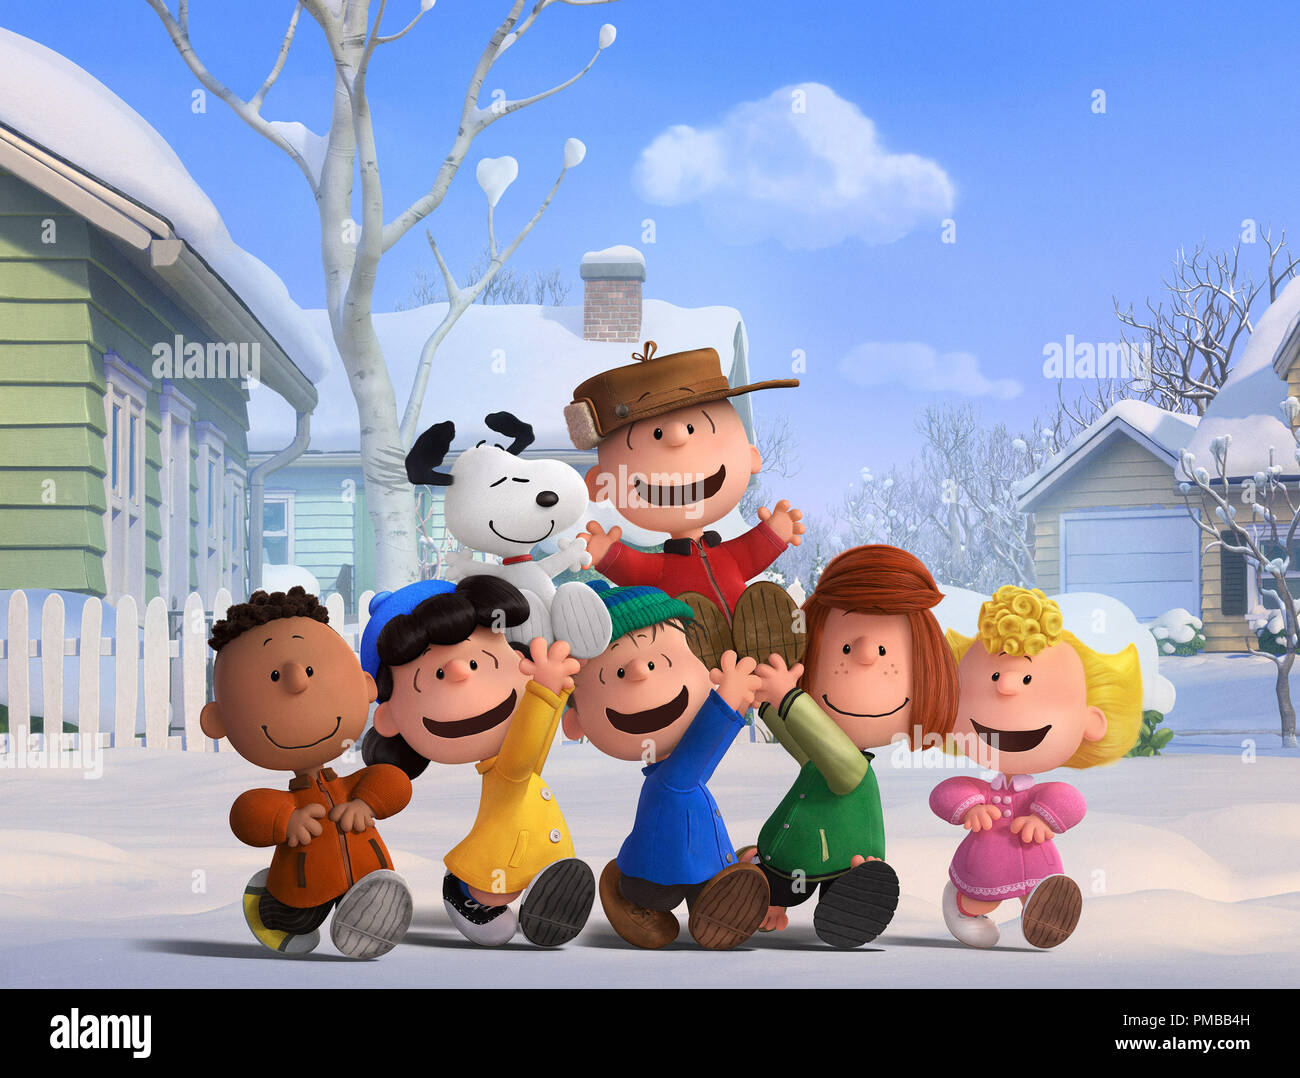 Linus Peanuts High Resolution Stock Photography and Images - Alamy